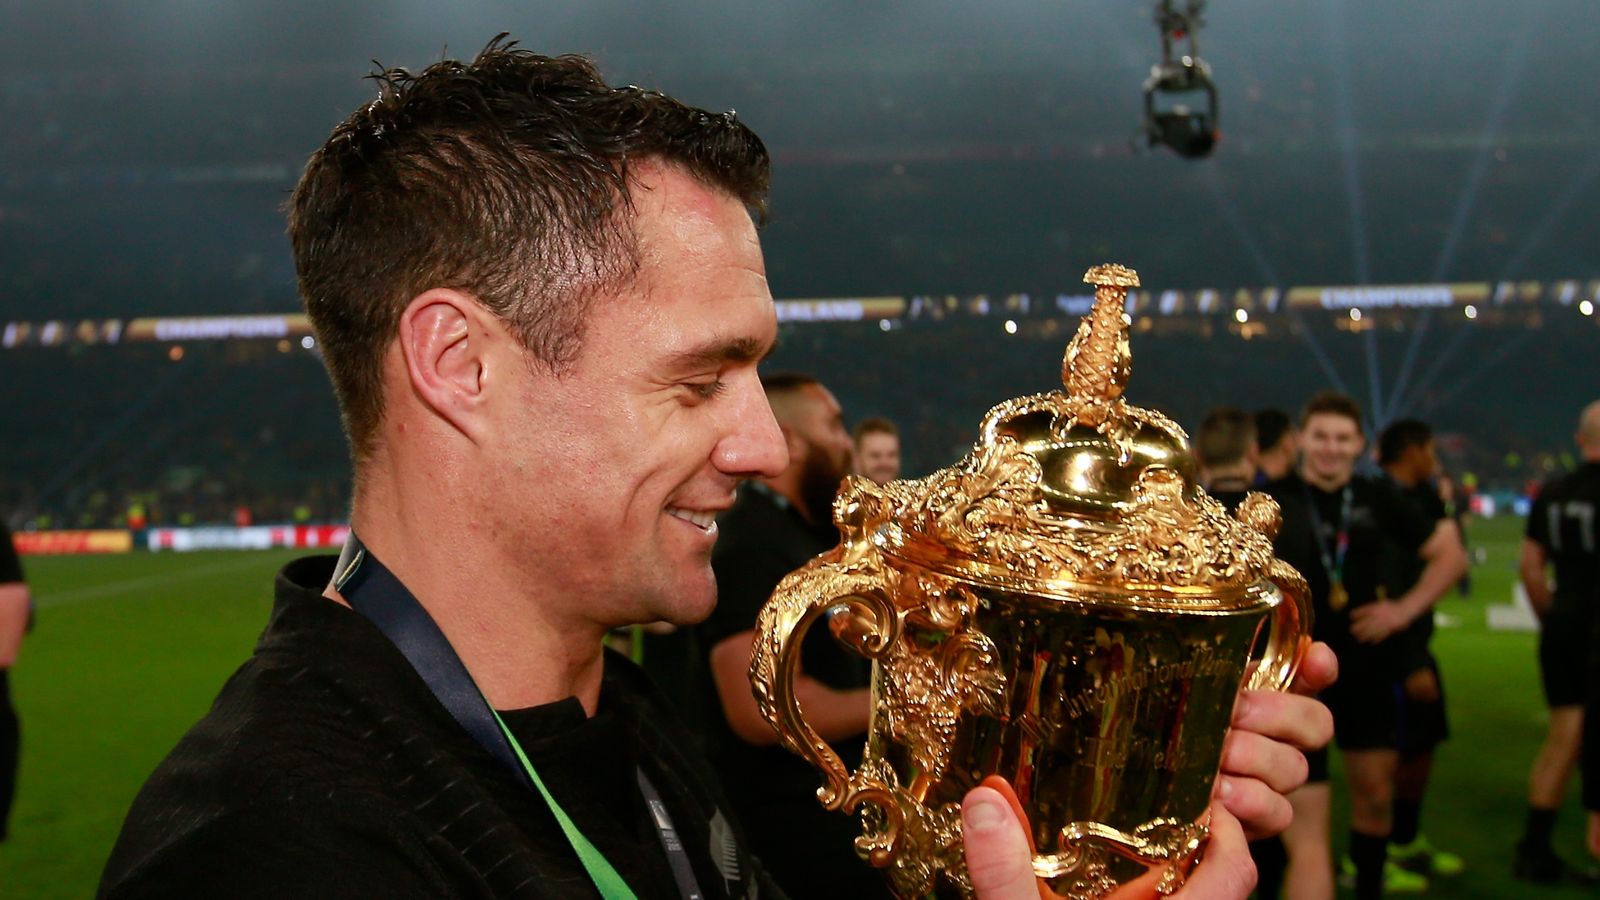 Dan Carter Dazzles at World Rugby Awards in Louis Vuitton